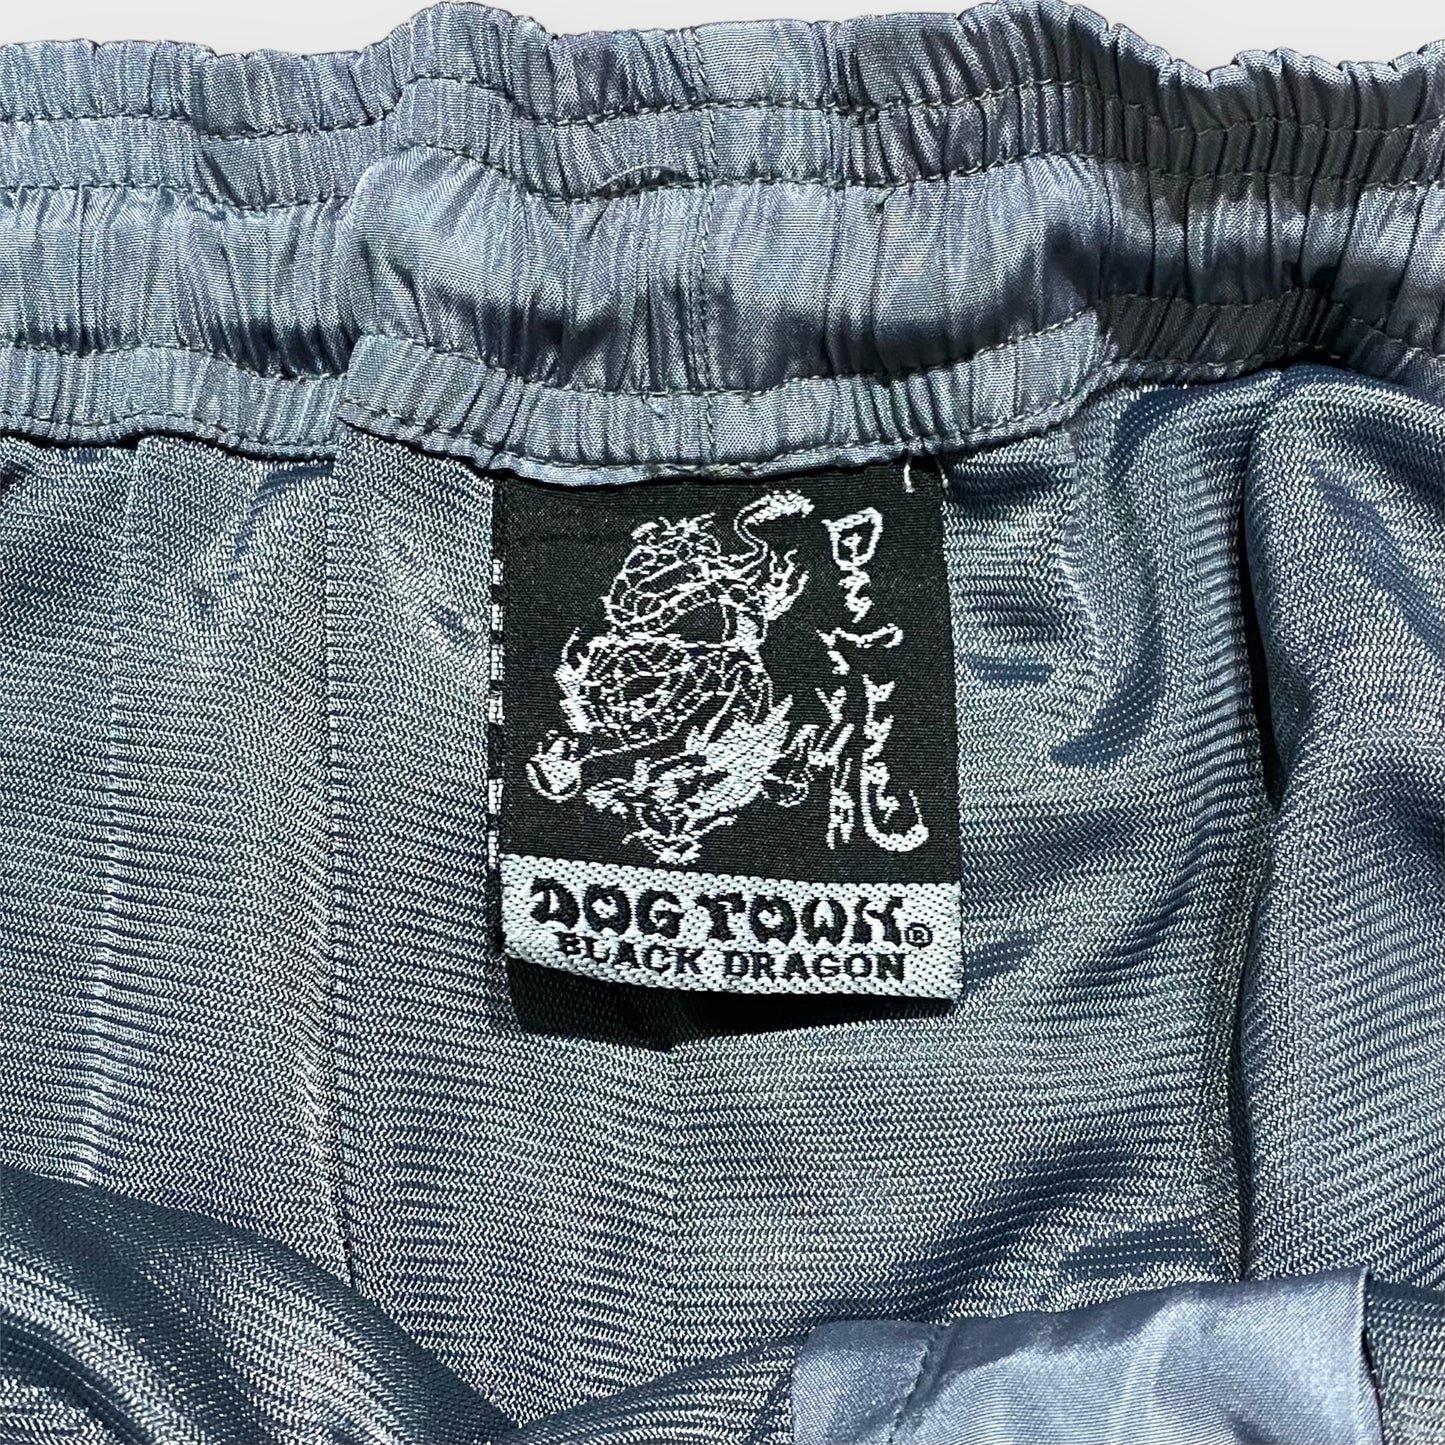 "DOG TOWN" Embroidery track pants